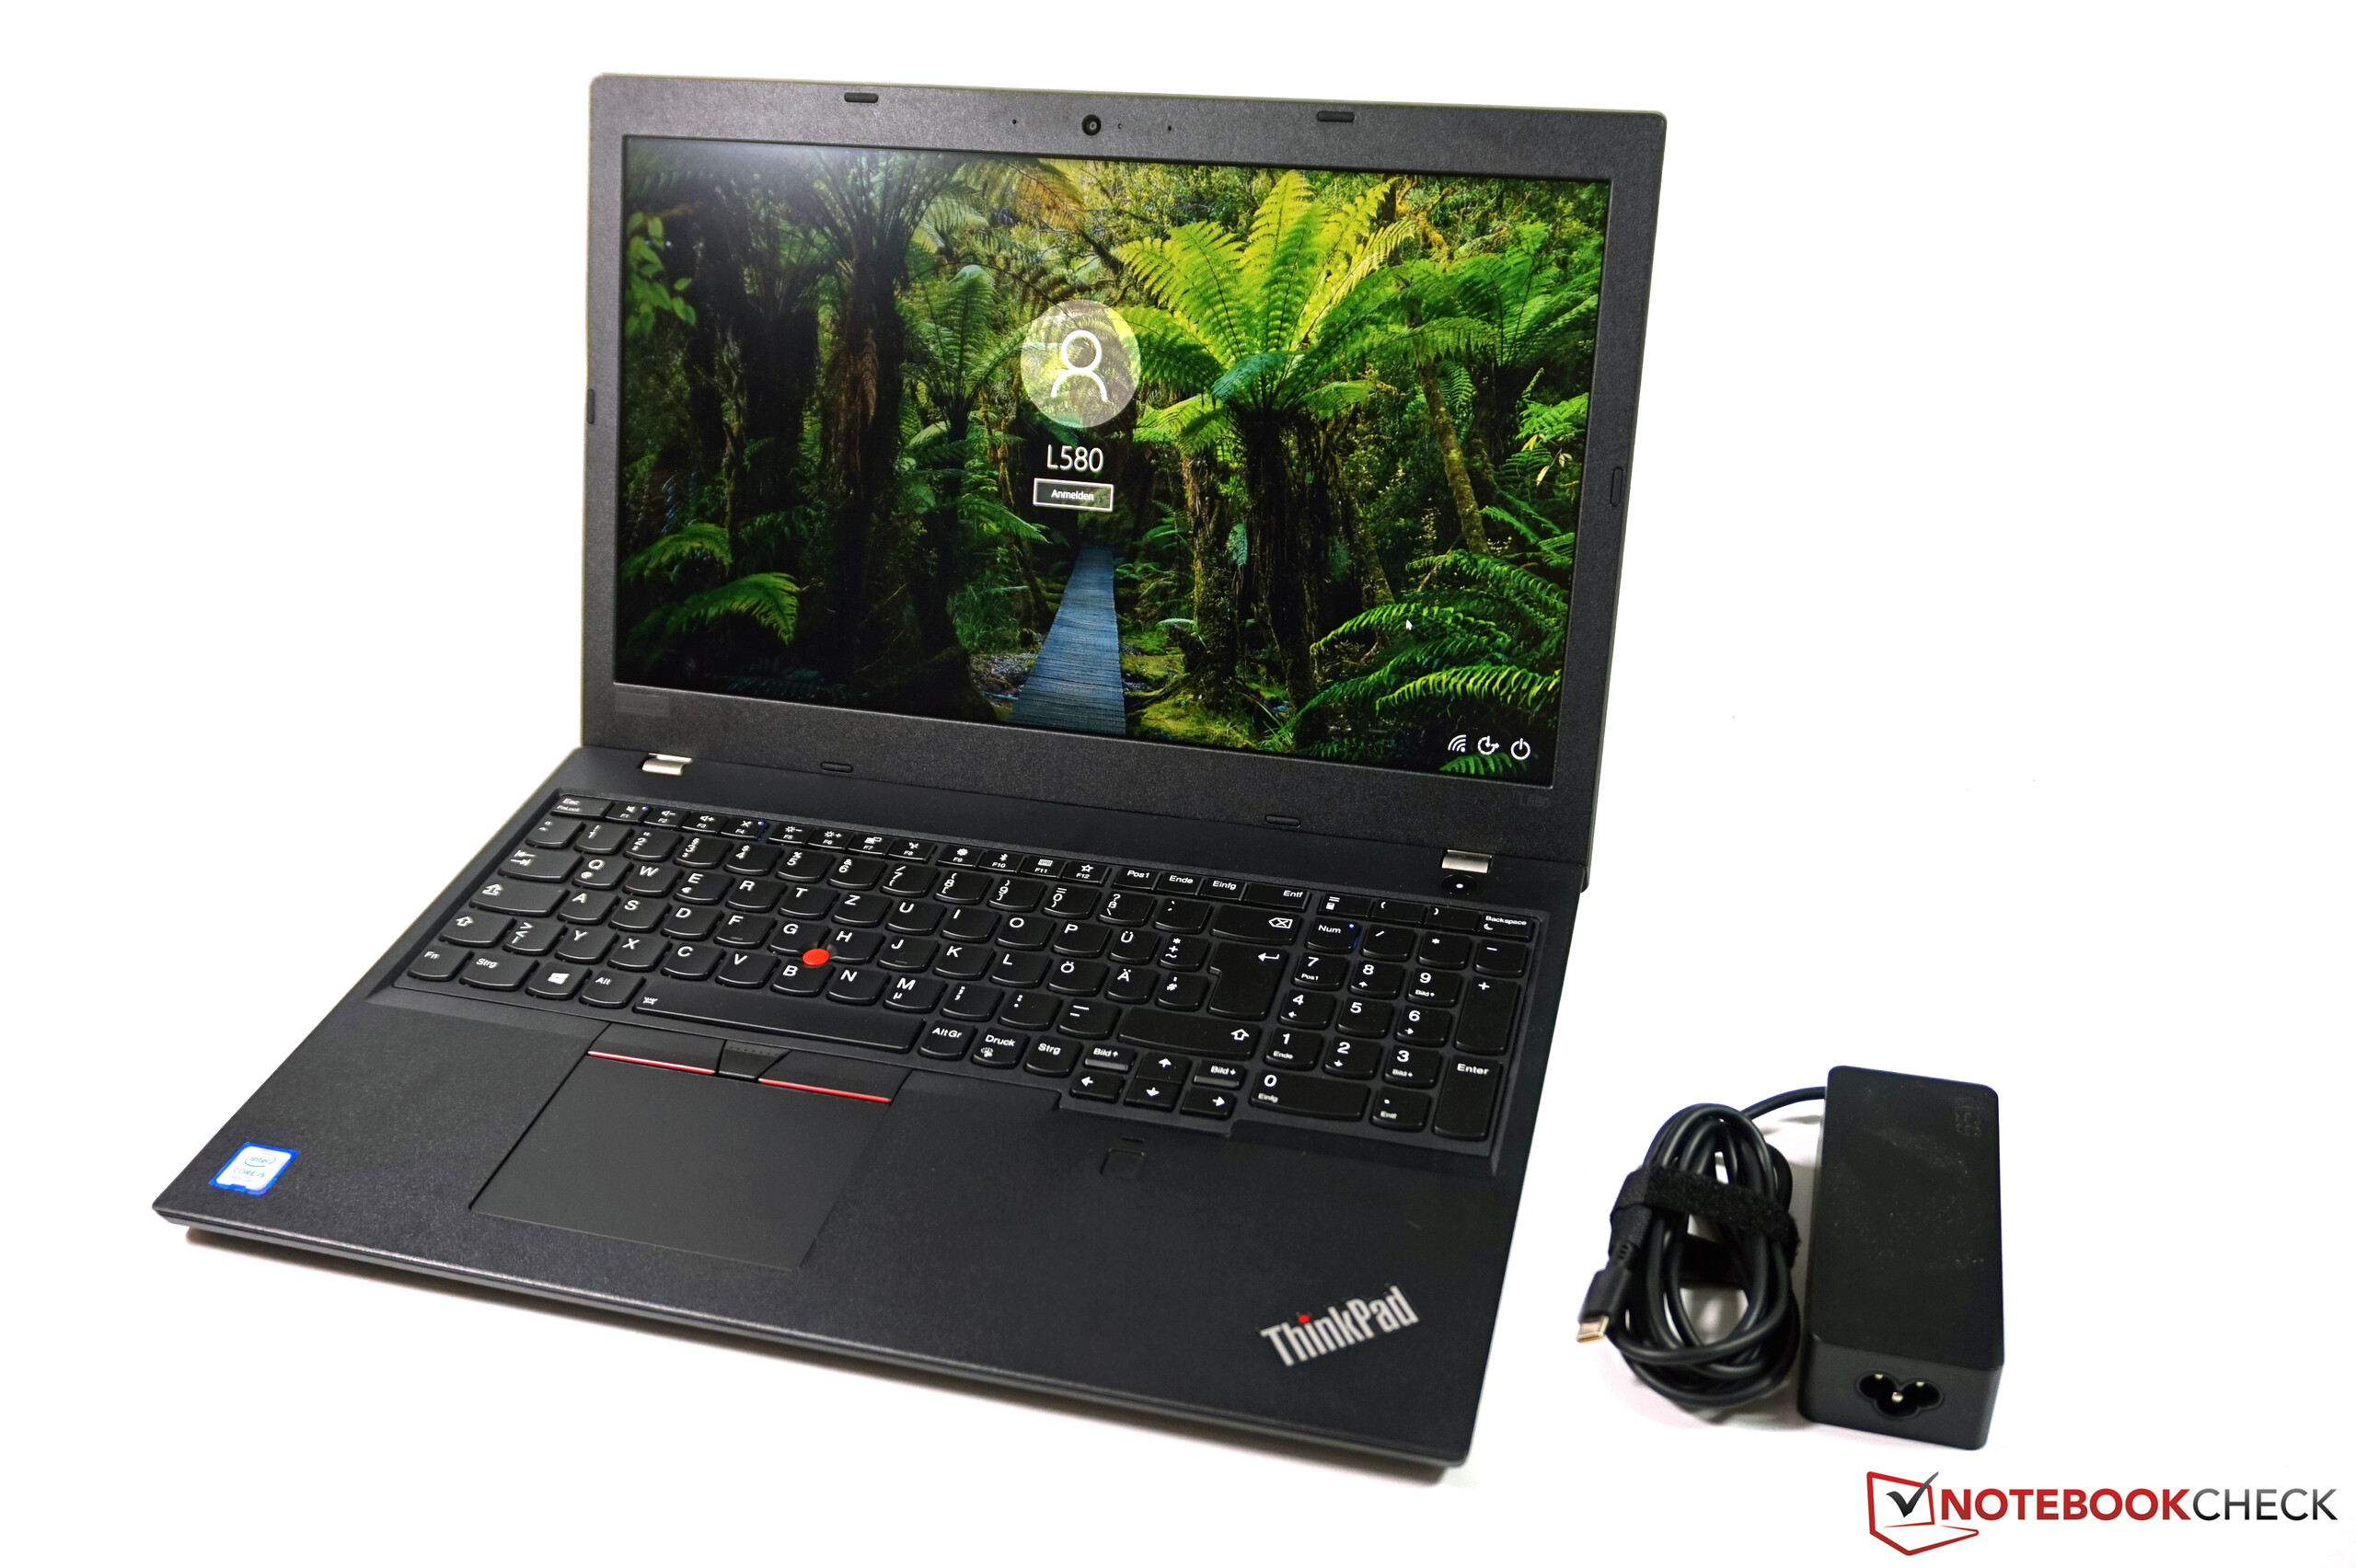 Lenovo ThinkPad L580 Laptop Review: Reliable office notebook with